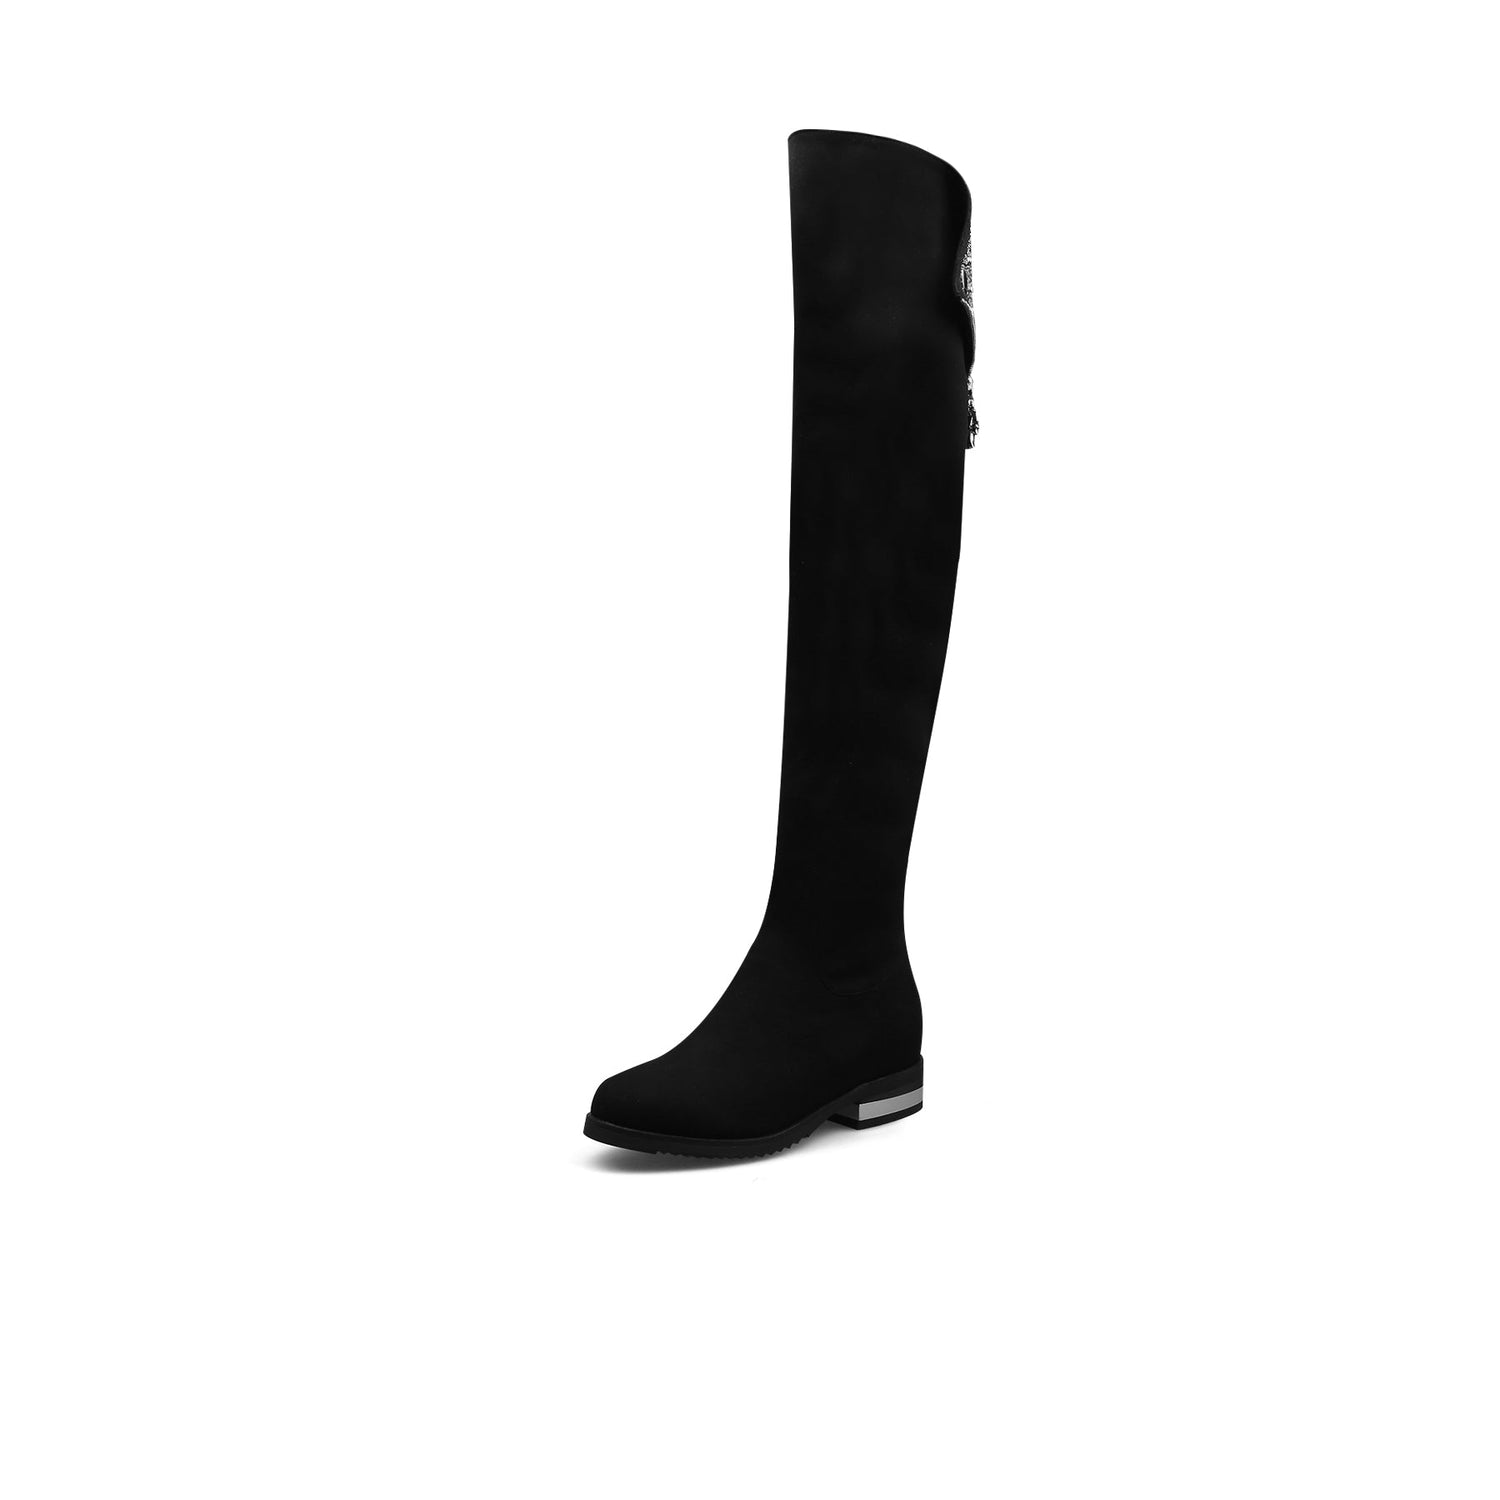 Urban Metal Contrasted Silver Knee-high Boots - 0cm